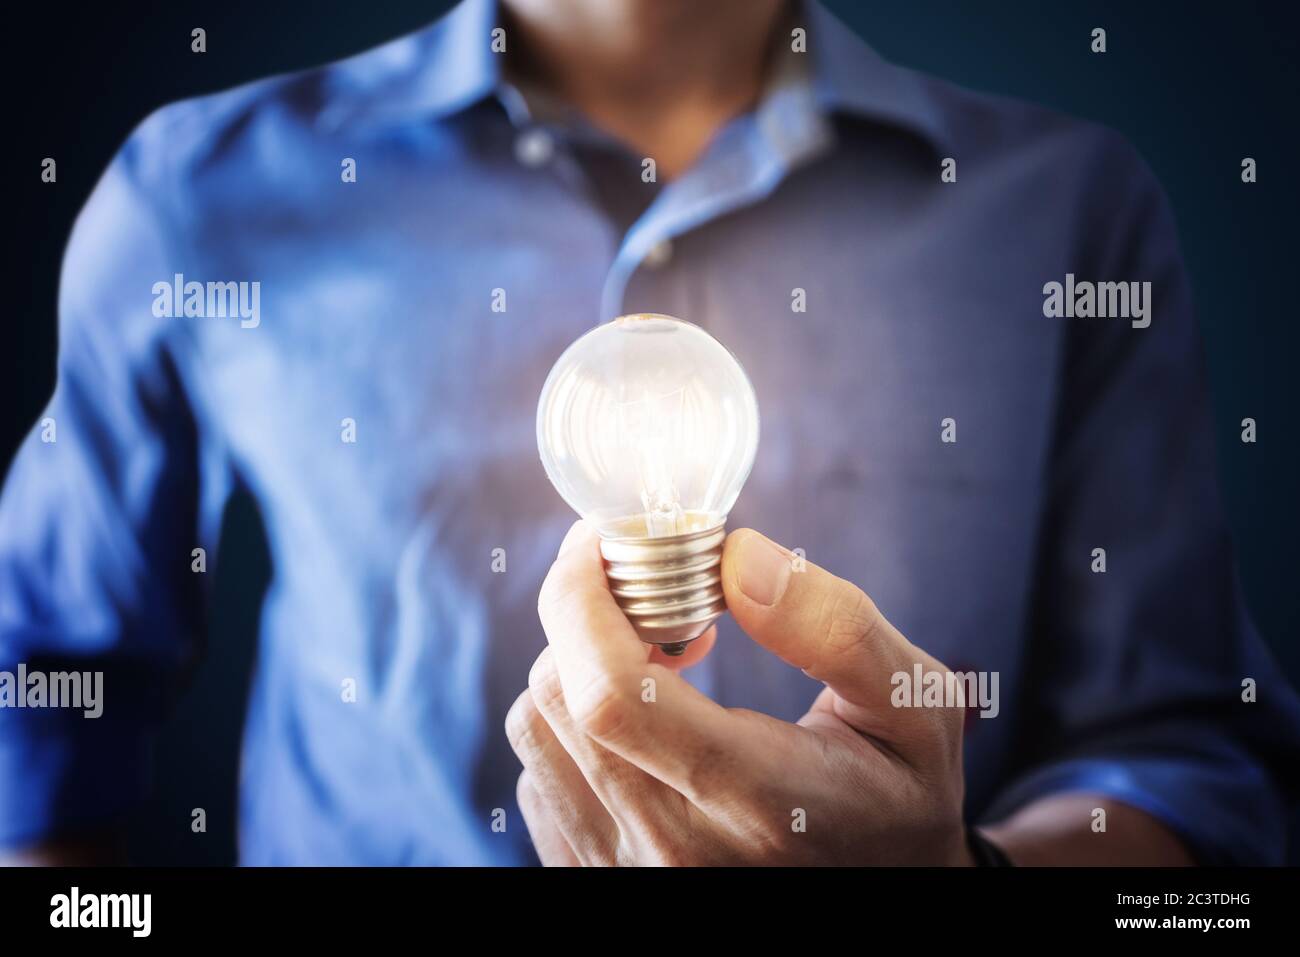 Businessman holding glowing light bulb. New ideas, innovation and saving energy concept Stock Photo